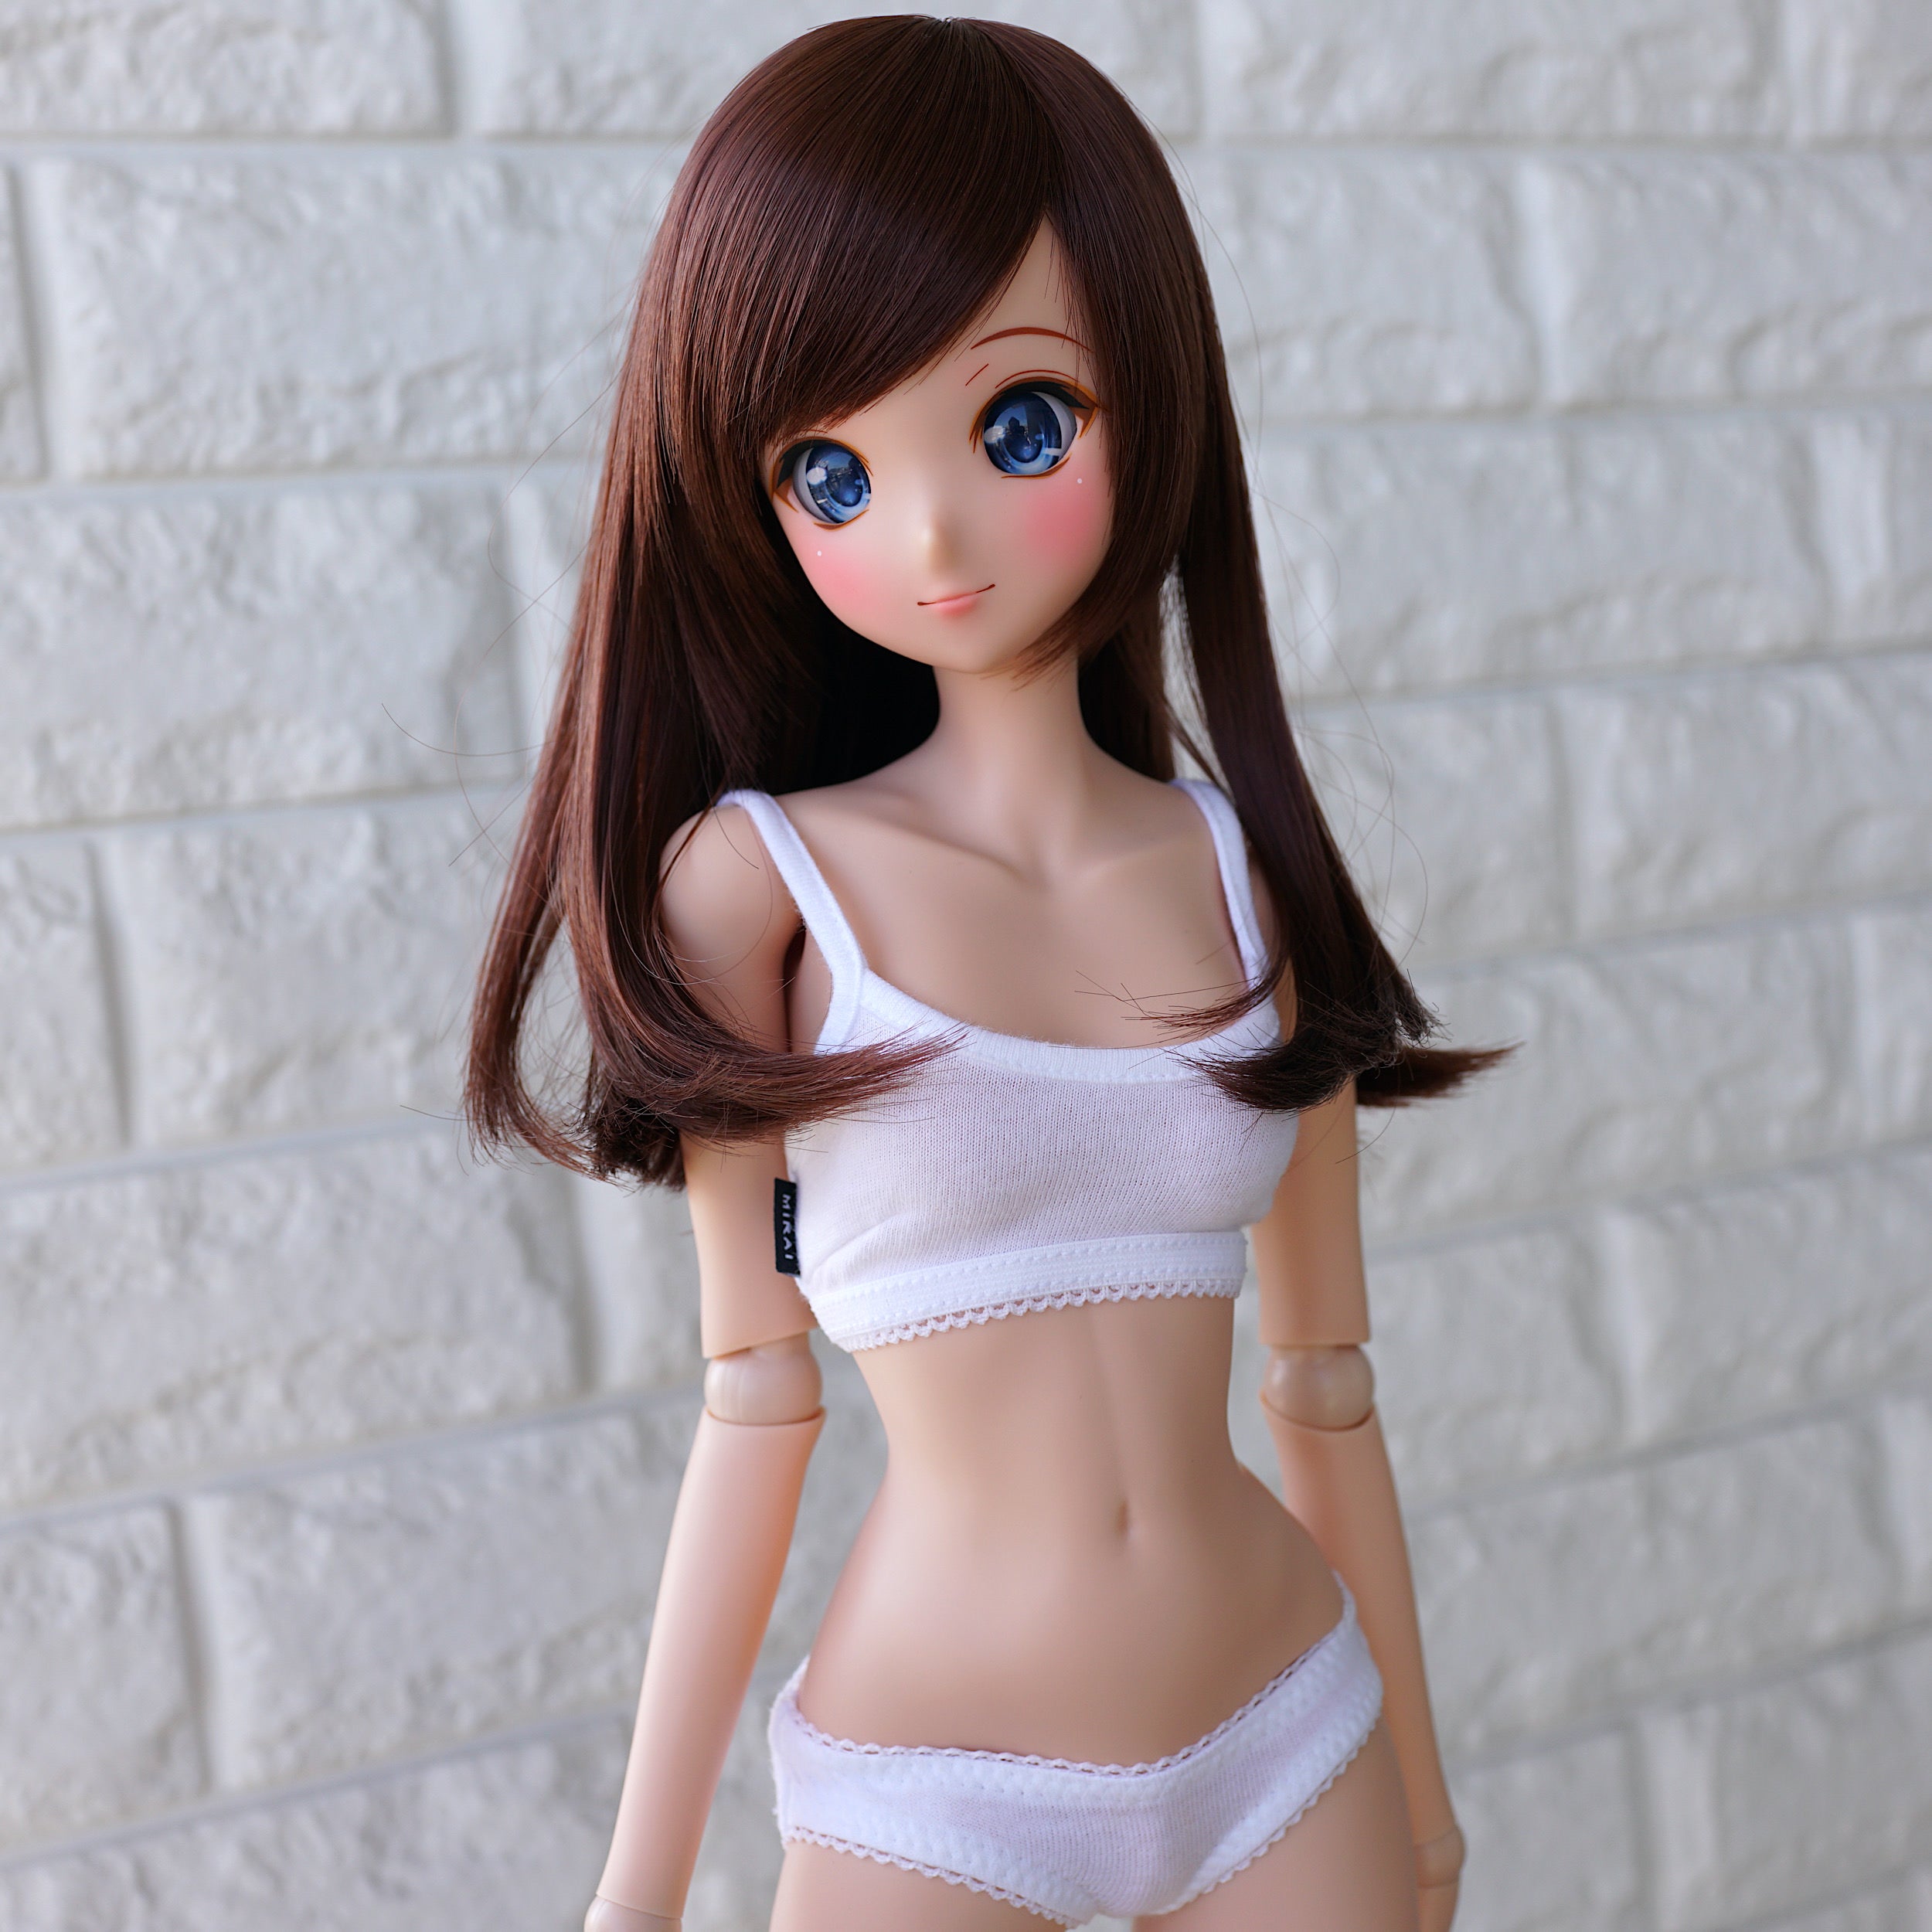 Smart Doll - Clarity – Smart Doll Store